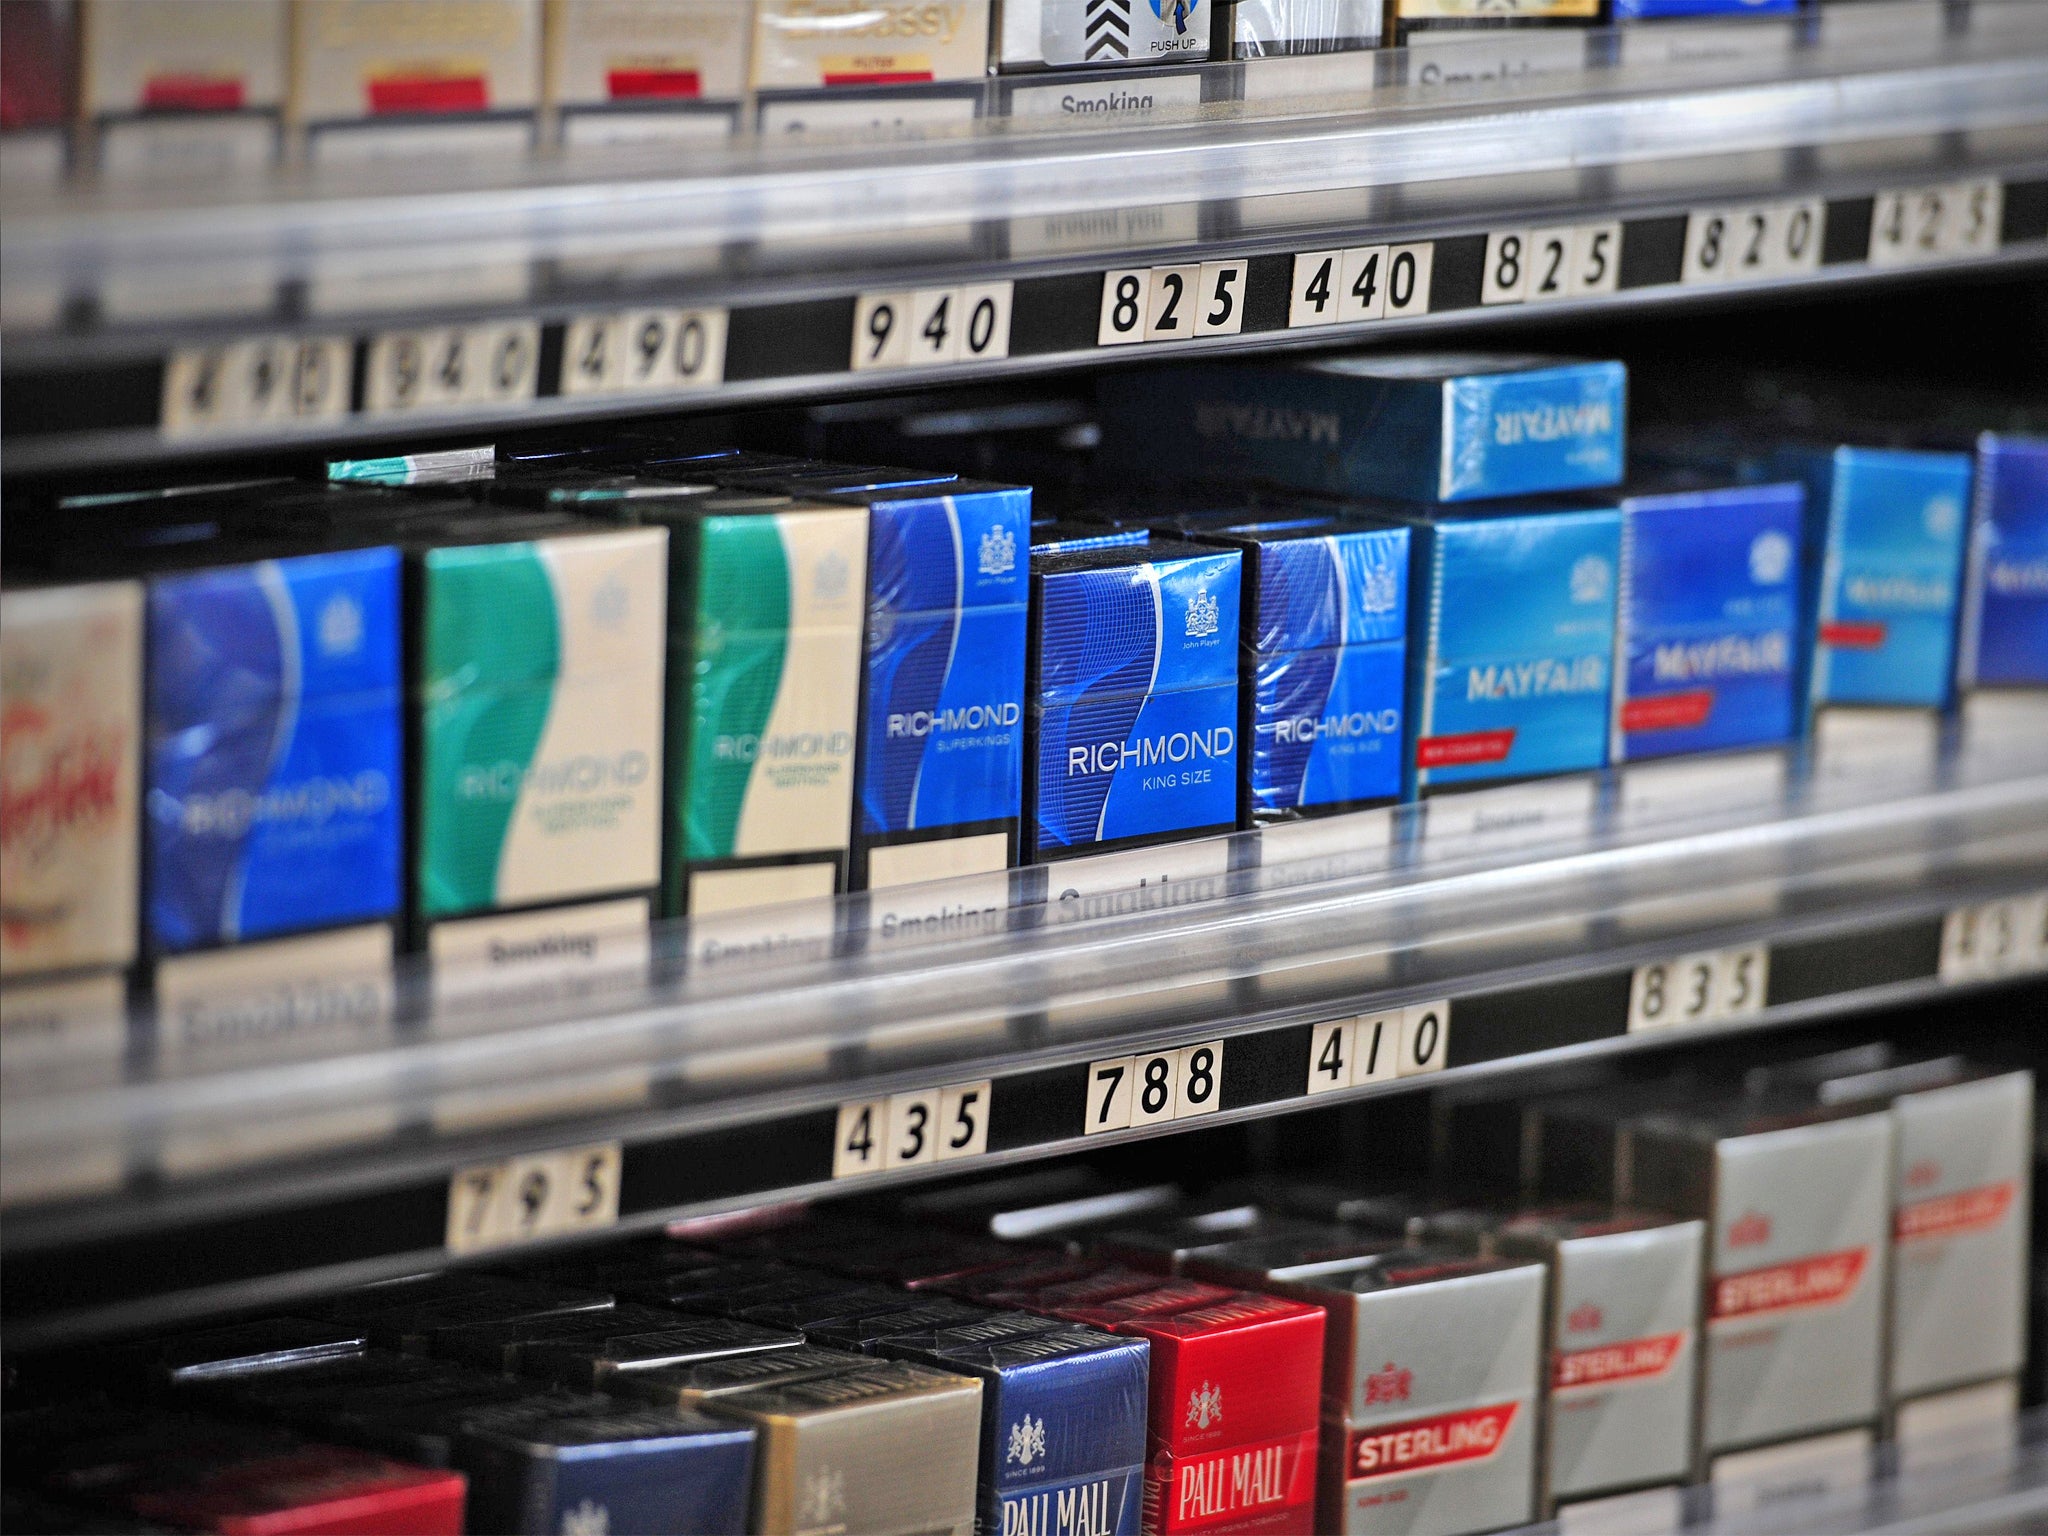 Plans to introduce plain packaging on cigarettes were first mooted two years ago